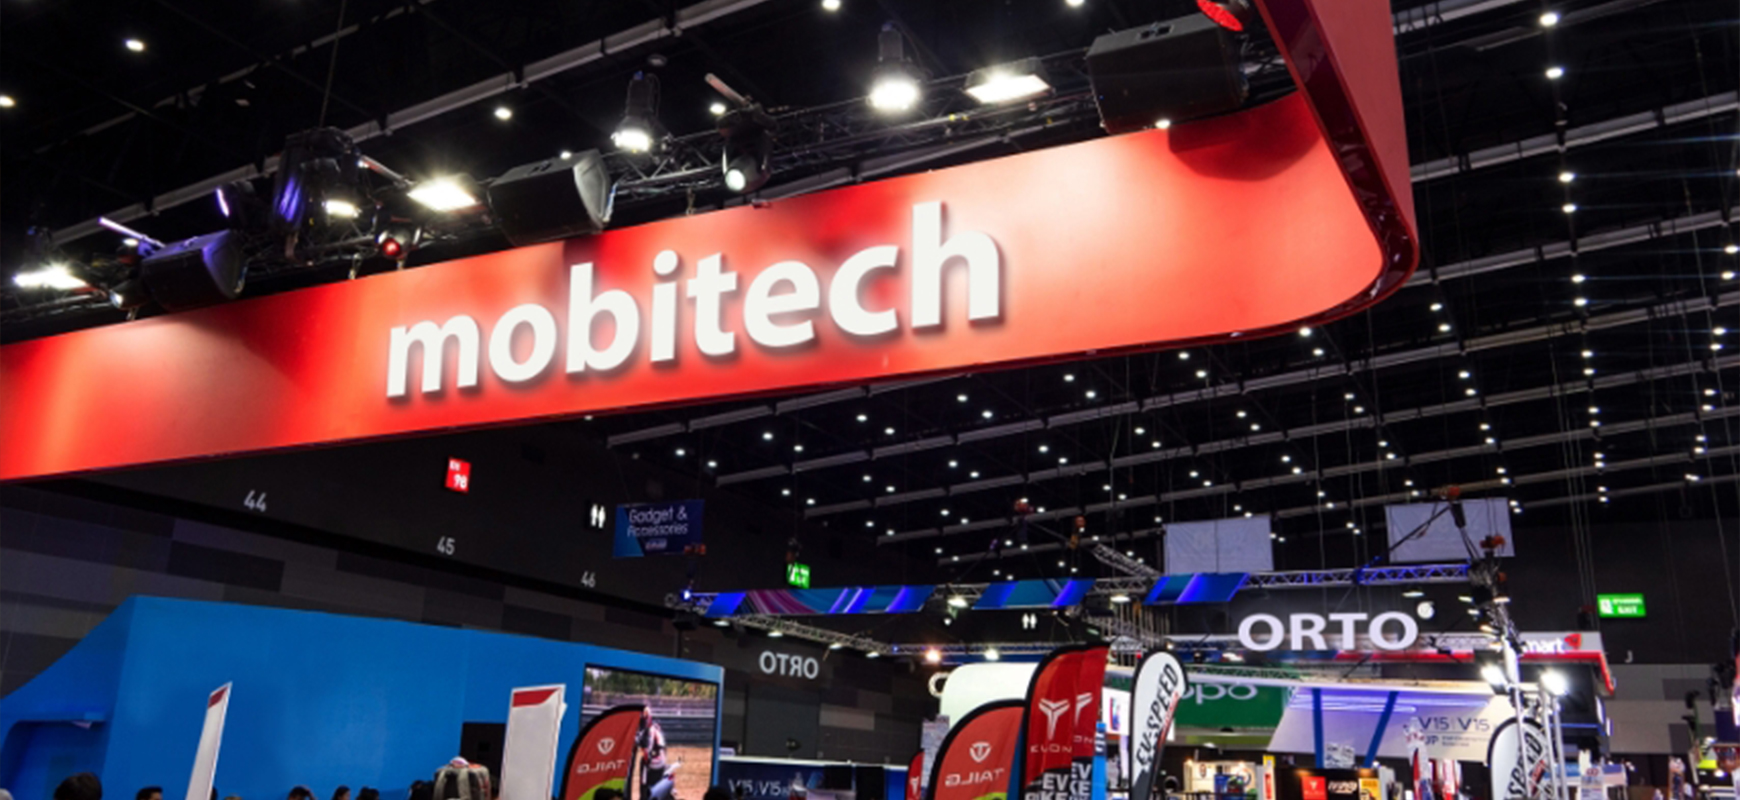 Mobitech corporate event signage on a red background with white 3d letters for branding